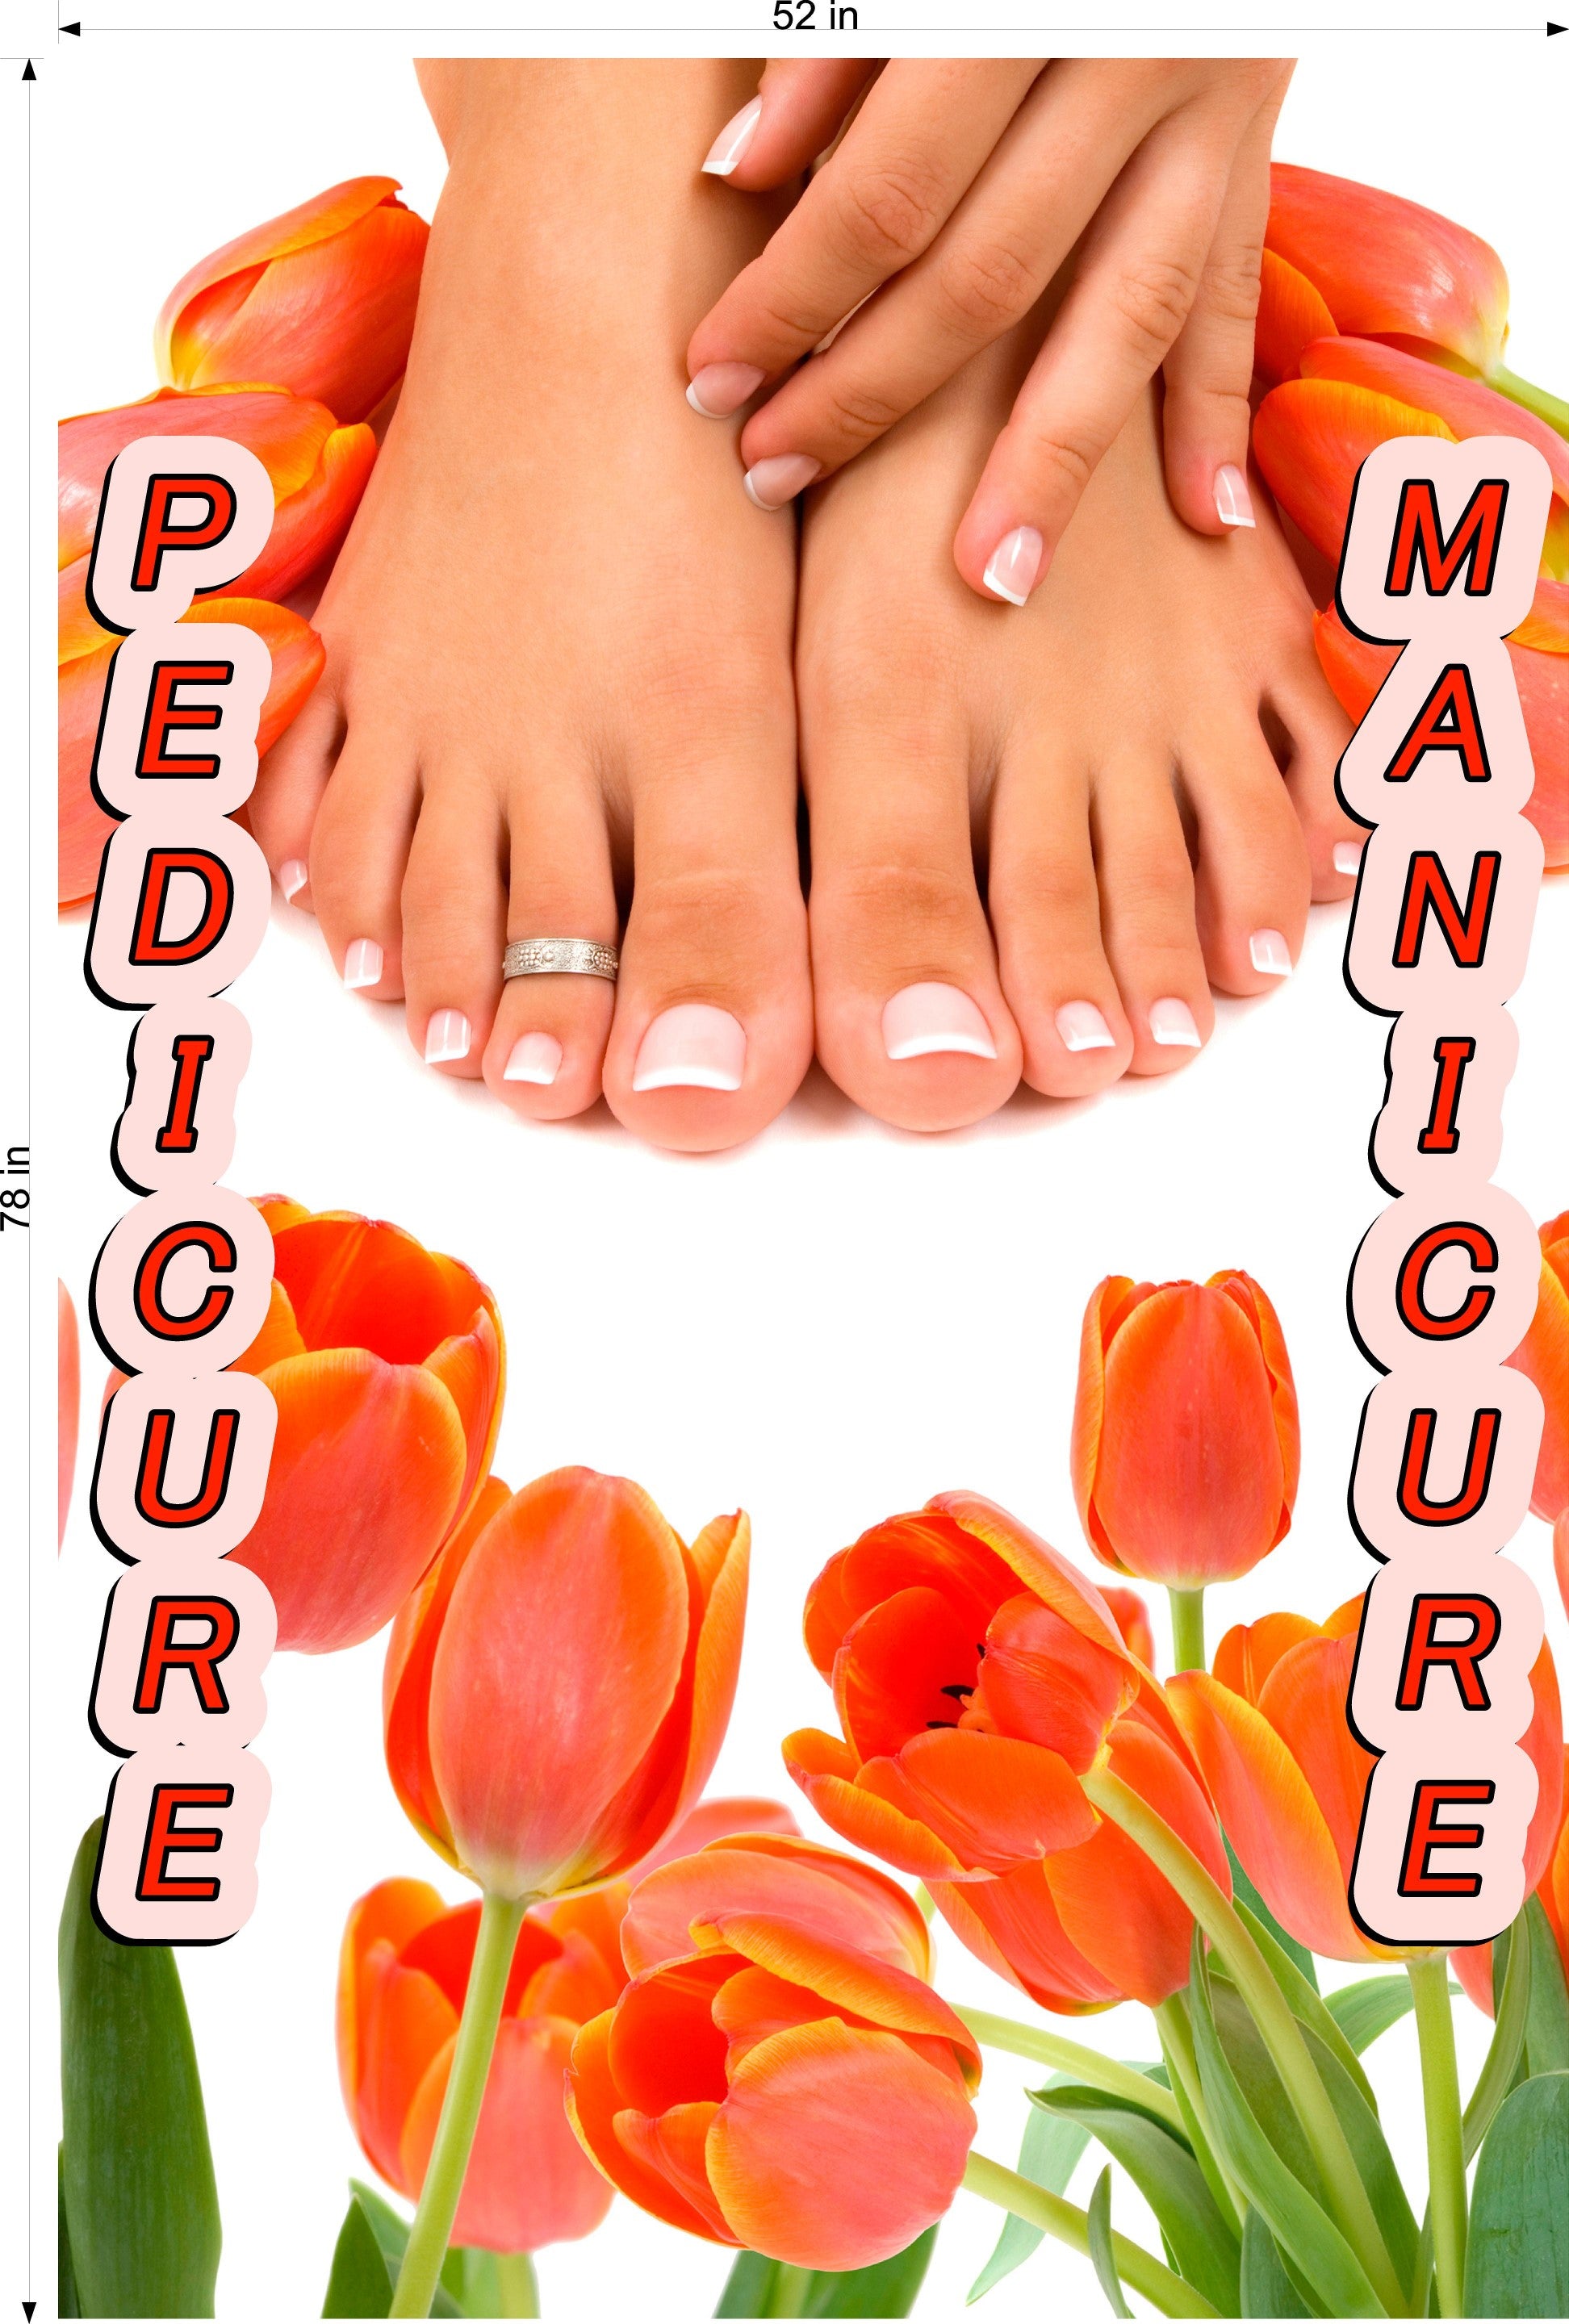 Pedicure & Manicure 16 Perforated Mesh One Way Vision Window Vinyl Nail Salon See Through Sign Vertical